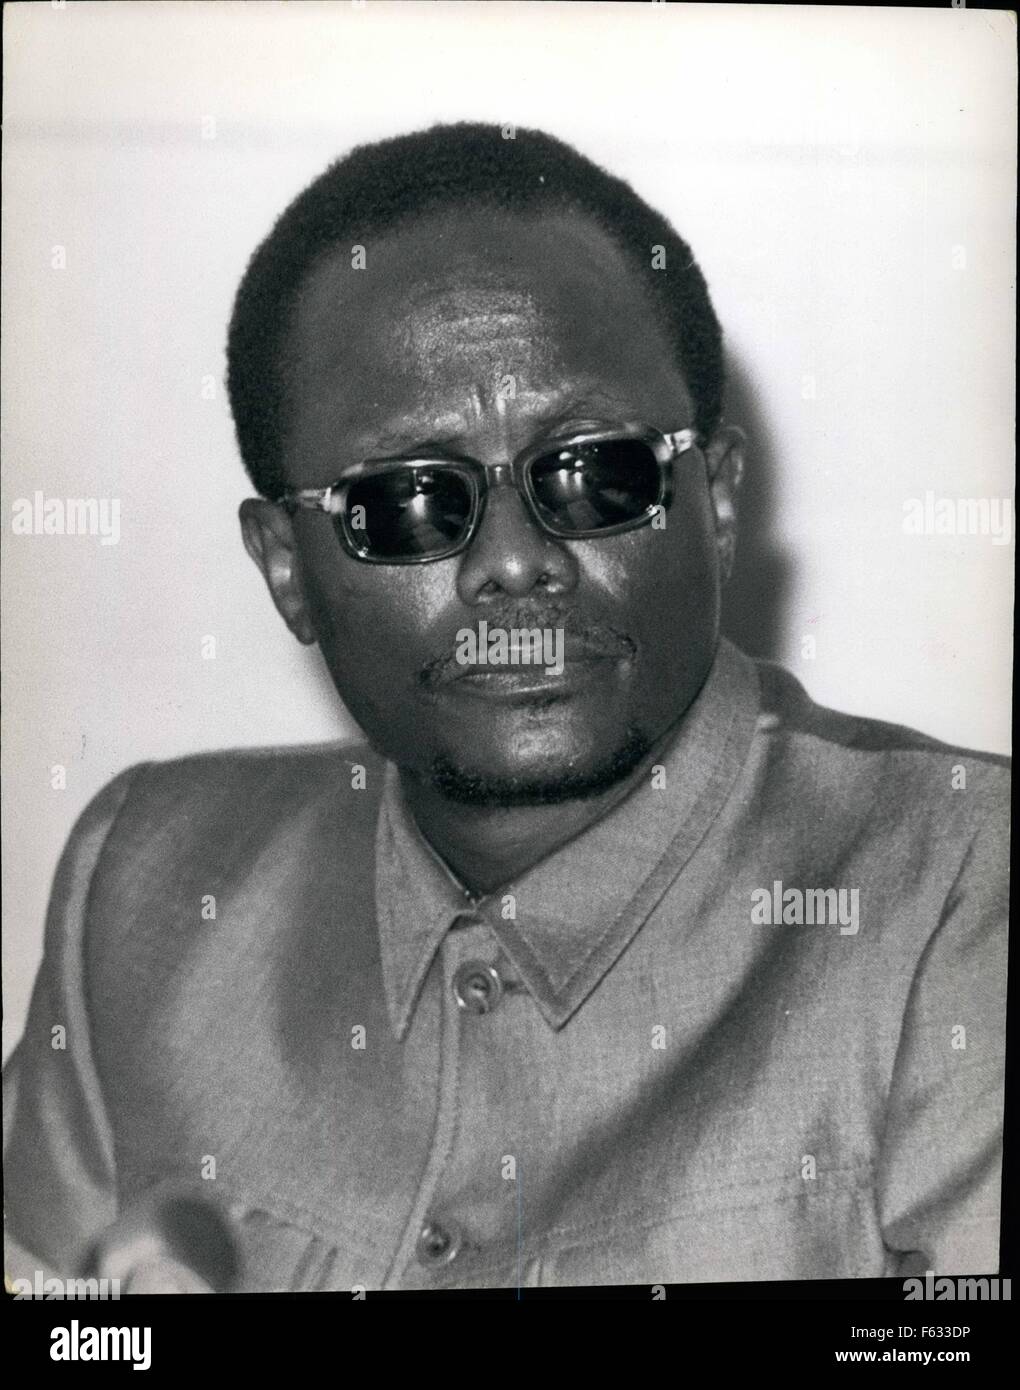 1962 - Credit: Camerapix Dr Holden Roberto, Leader of FNLA, Angolan Liberation Movement. Born 1925. Educated in the Congo. Worked in Fiance Department, Belgian Congo, 1950 - 1954. Founded UPA Party, 1954. Leader of FNLA, 1962. © Keystone Pictures USA/ZUMAPRESS.com/Alamy Live News Stock Photo